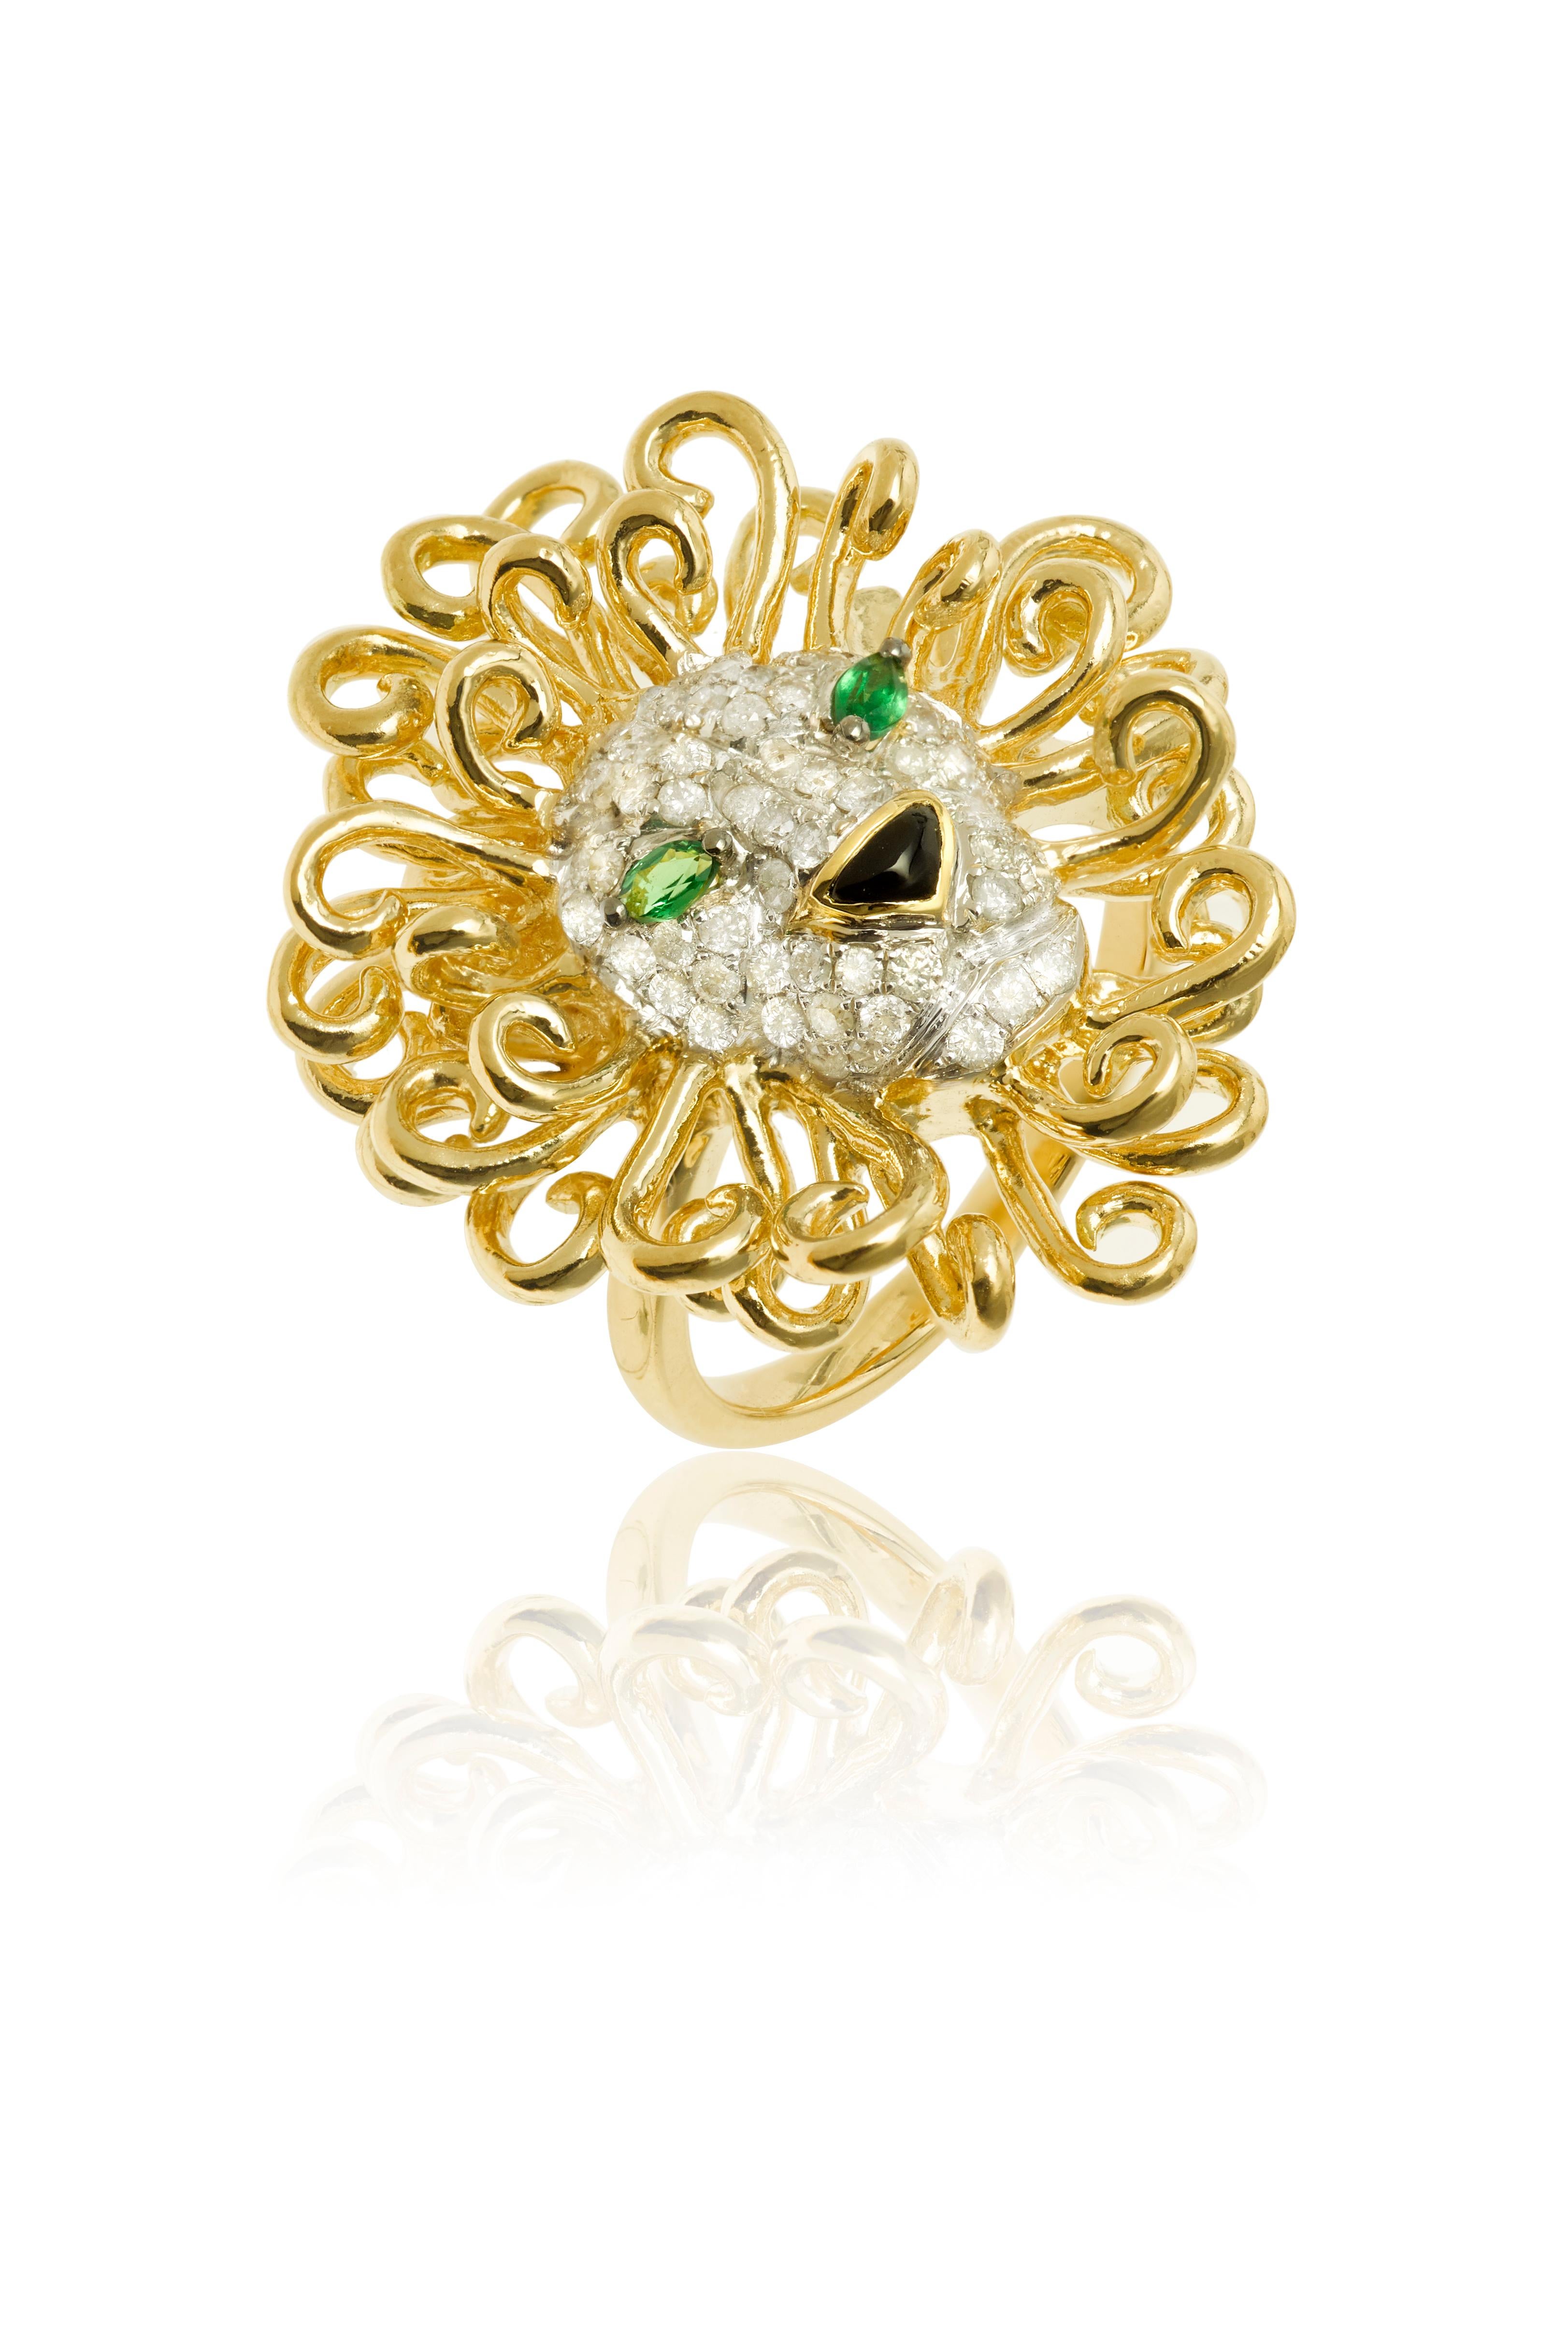 Round Cut Yvonne Leon's Lion Ring in 18 Karat Yellow Gold, Diamonds and Tsavorites For Sale